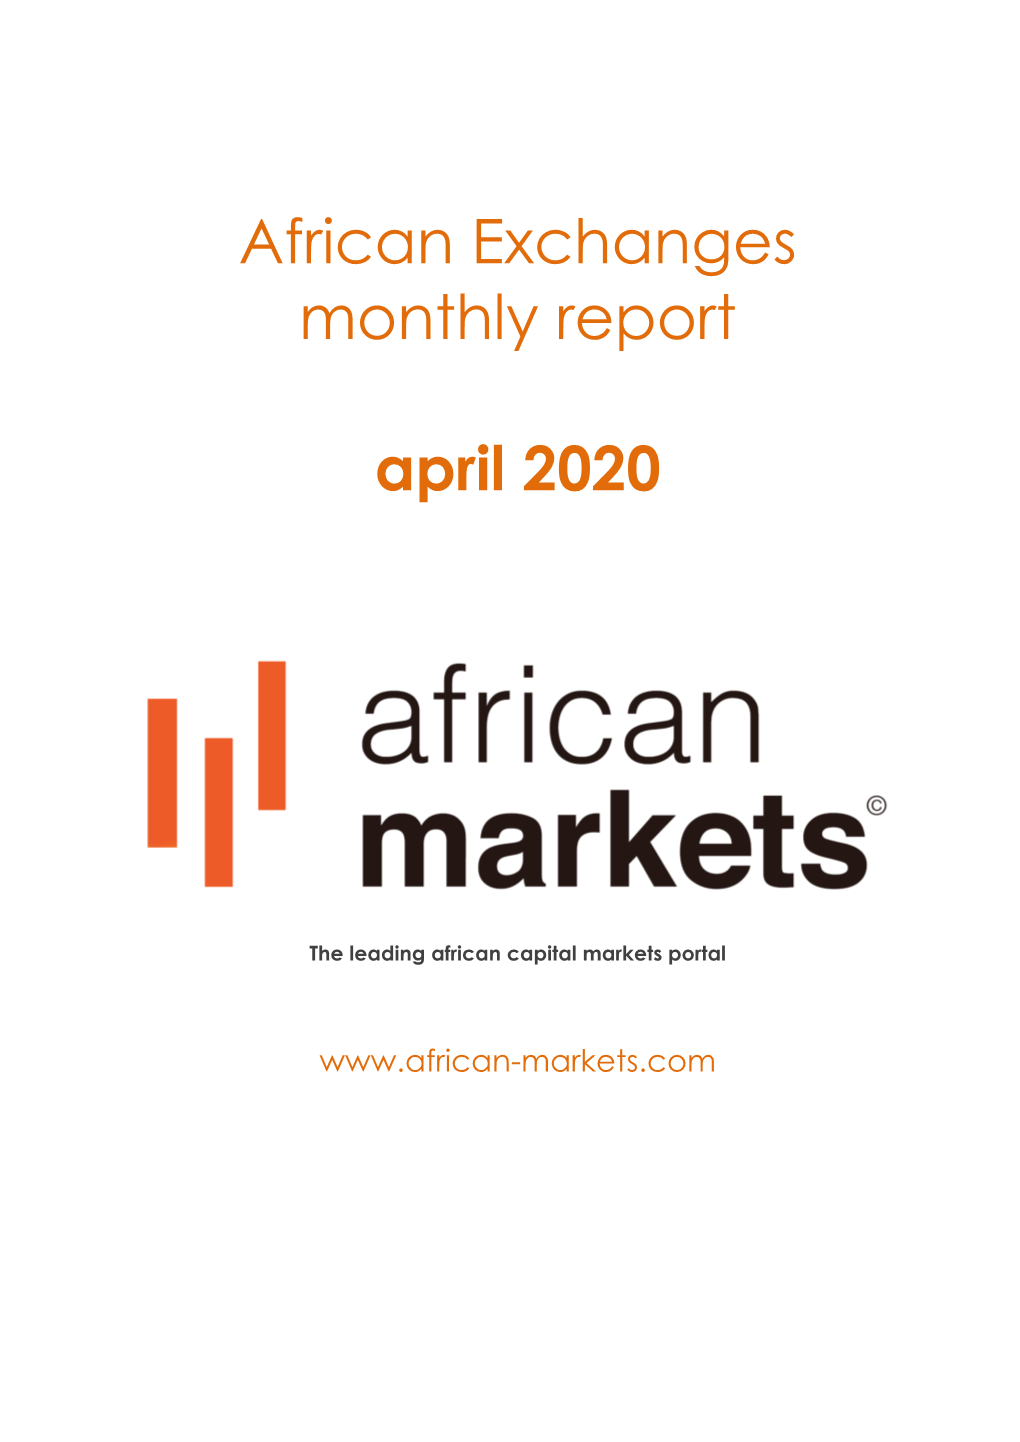 African Exchanges Monthly Report April 2020